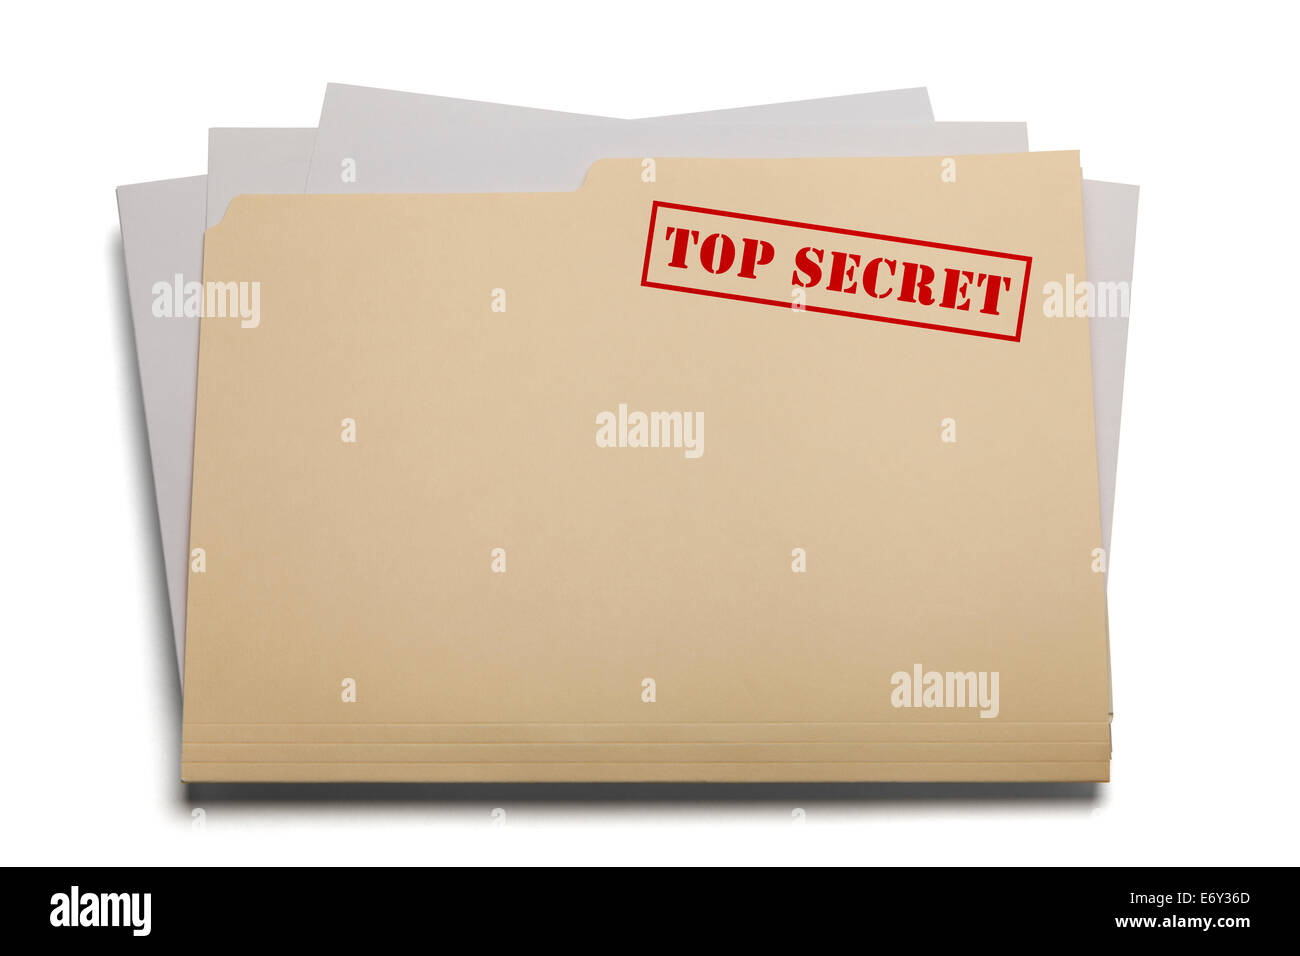 Folder And Papers With The Words Top Secret Stamped On It Isolated Stock Photo Alamy